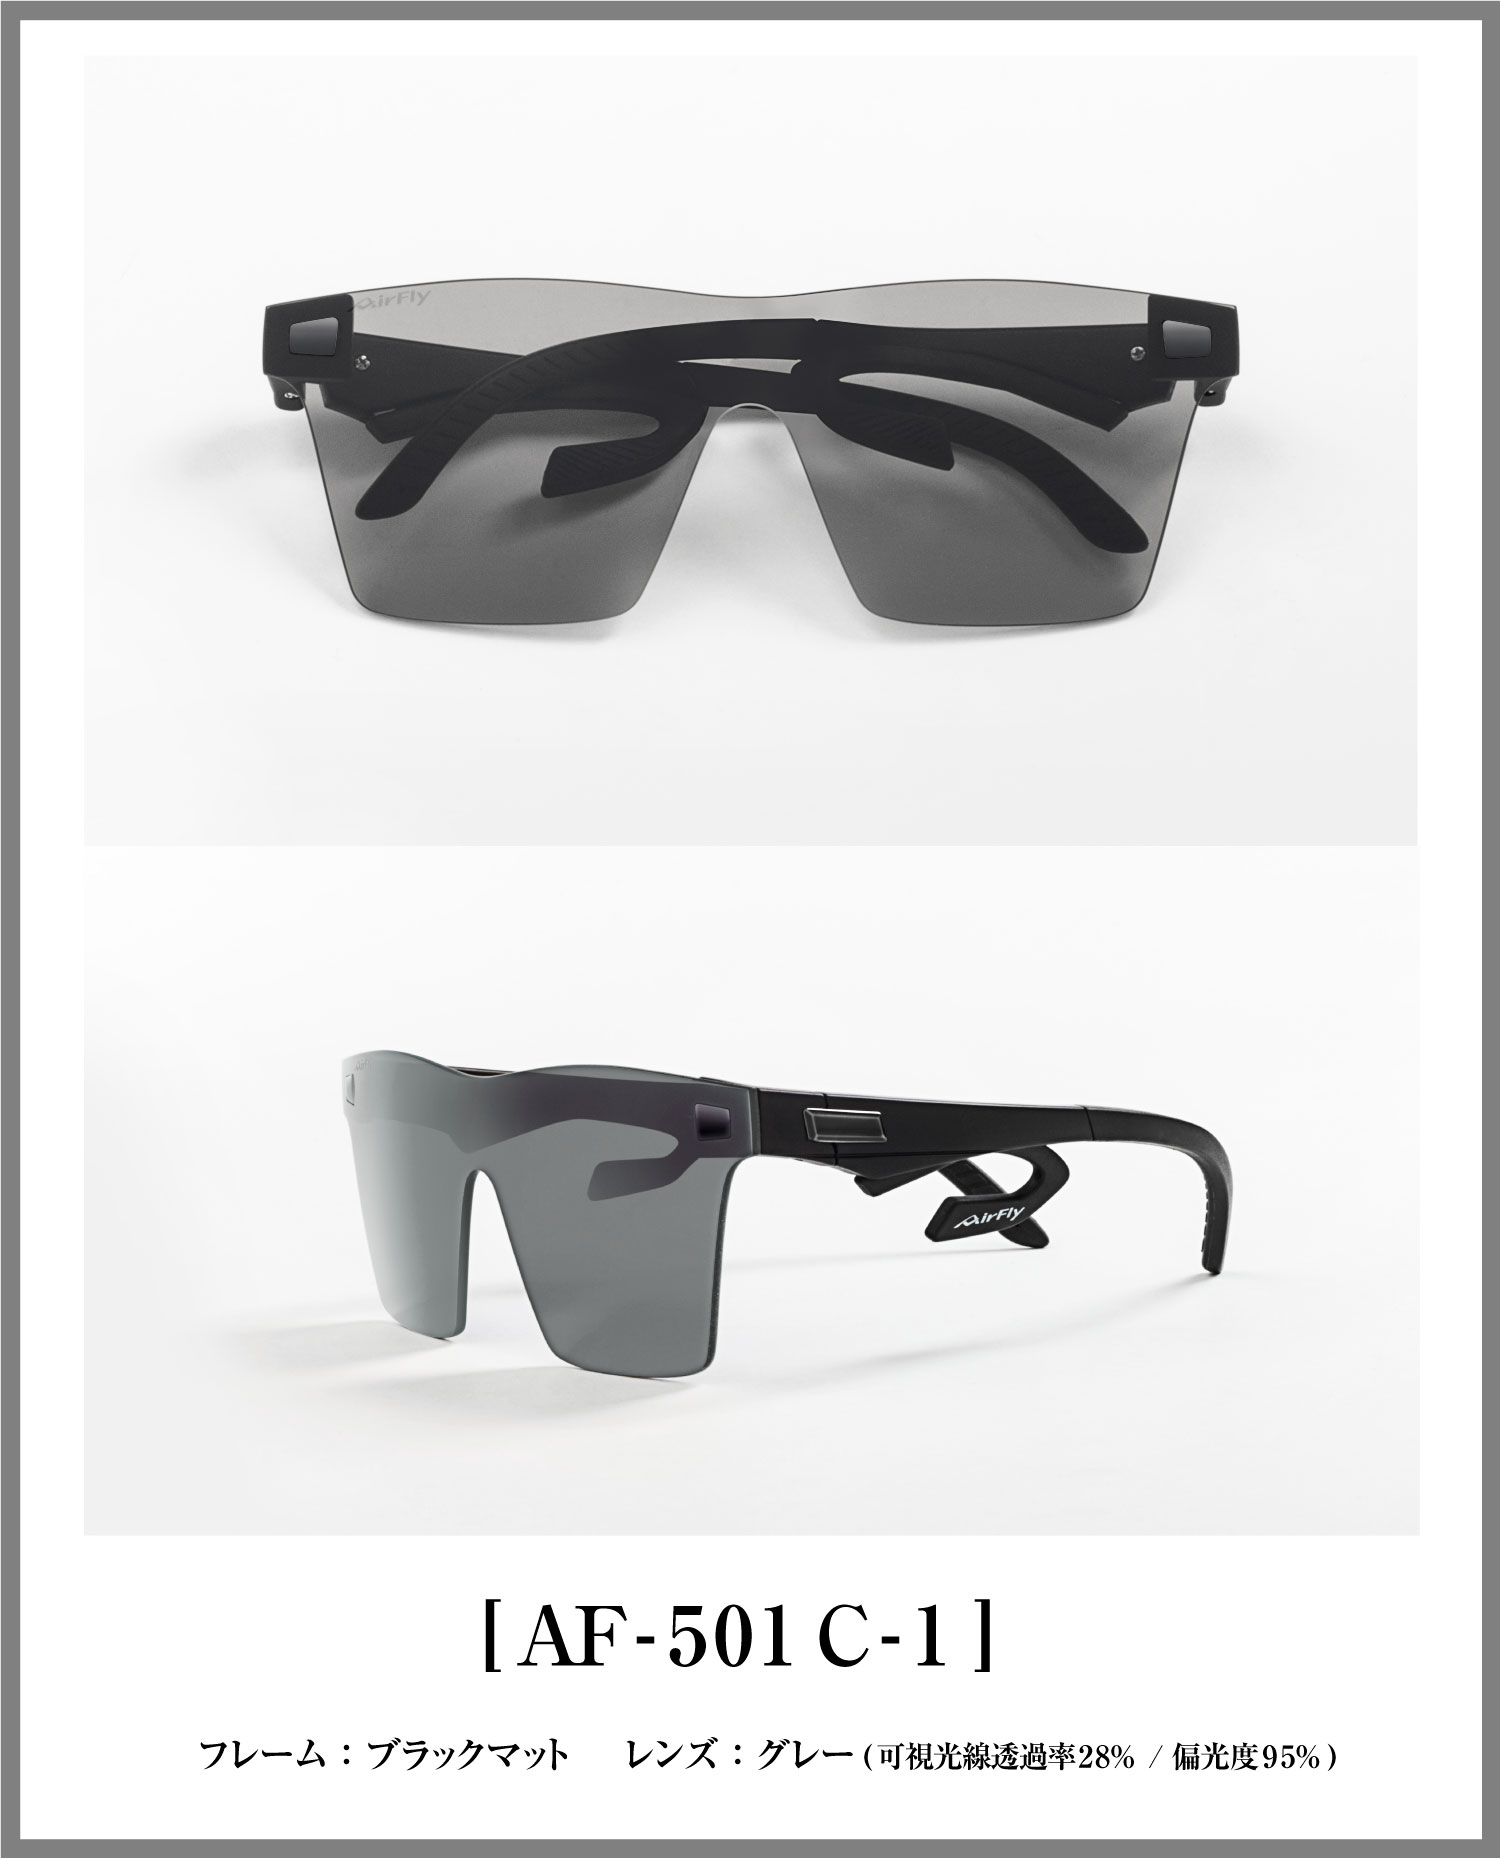 AF-501 C-1 sports-casual sunglasses AirFly